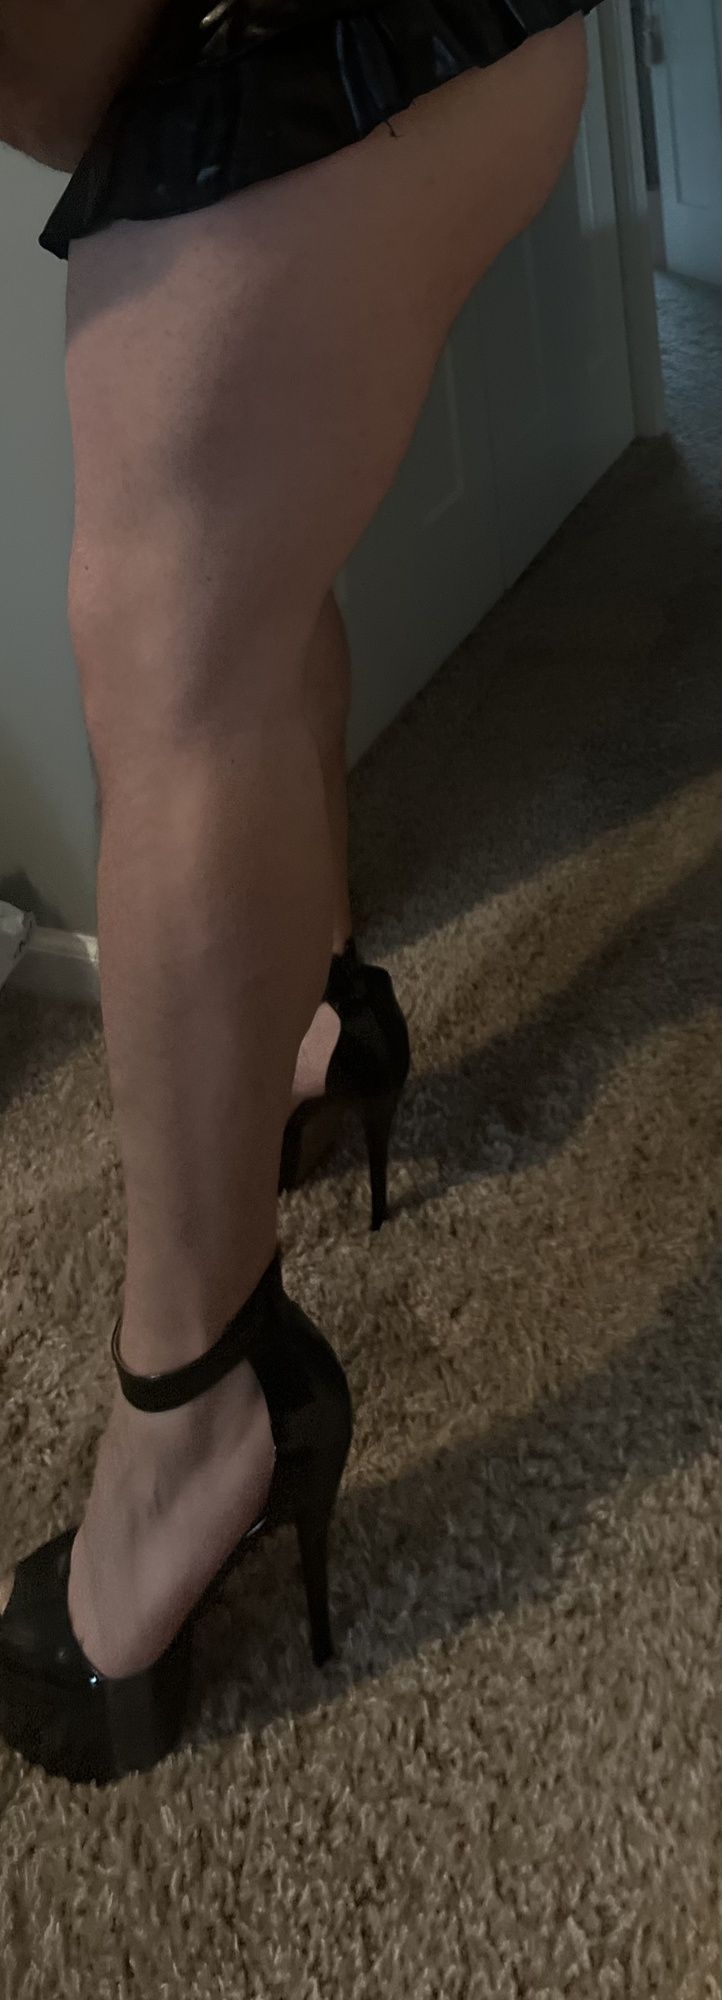 New clothes and heels! #3